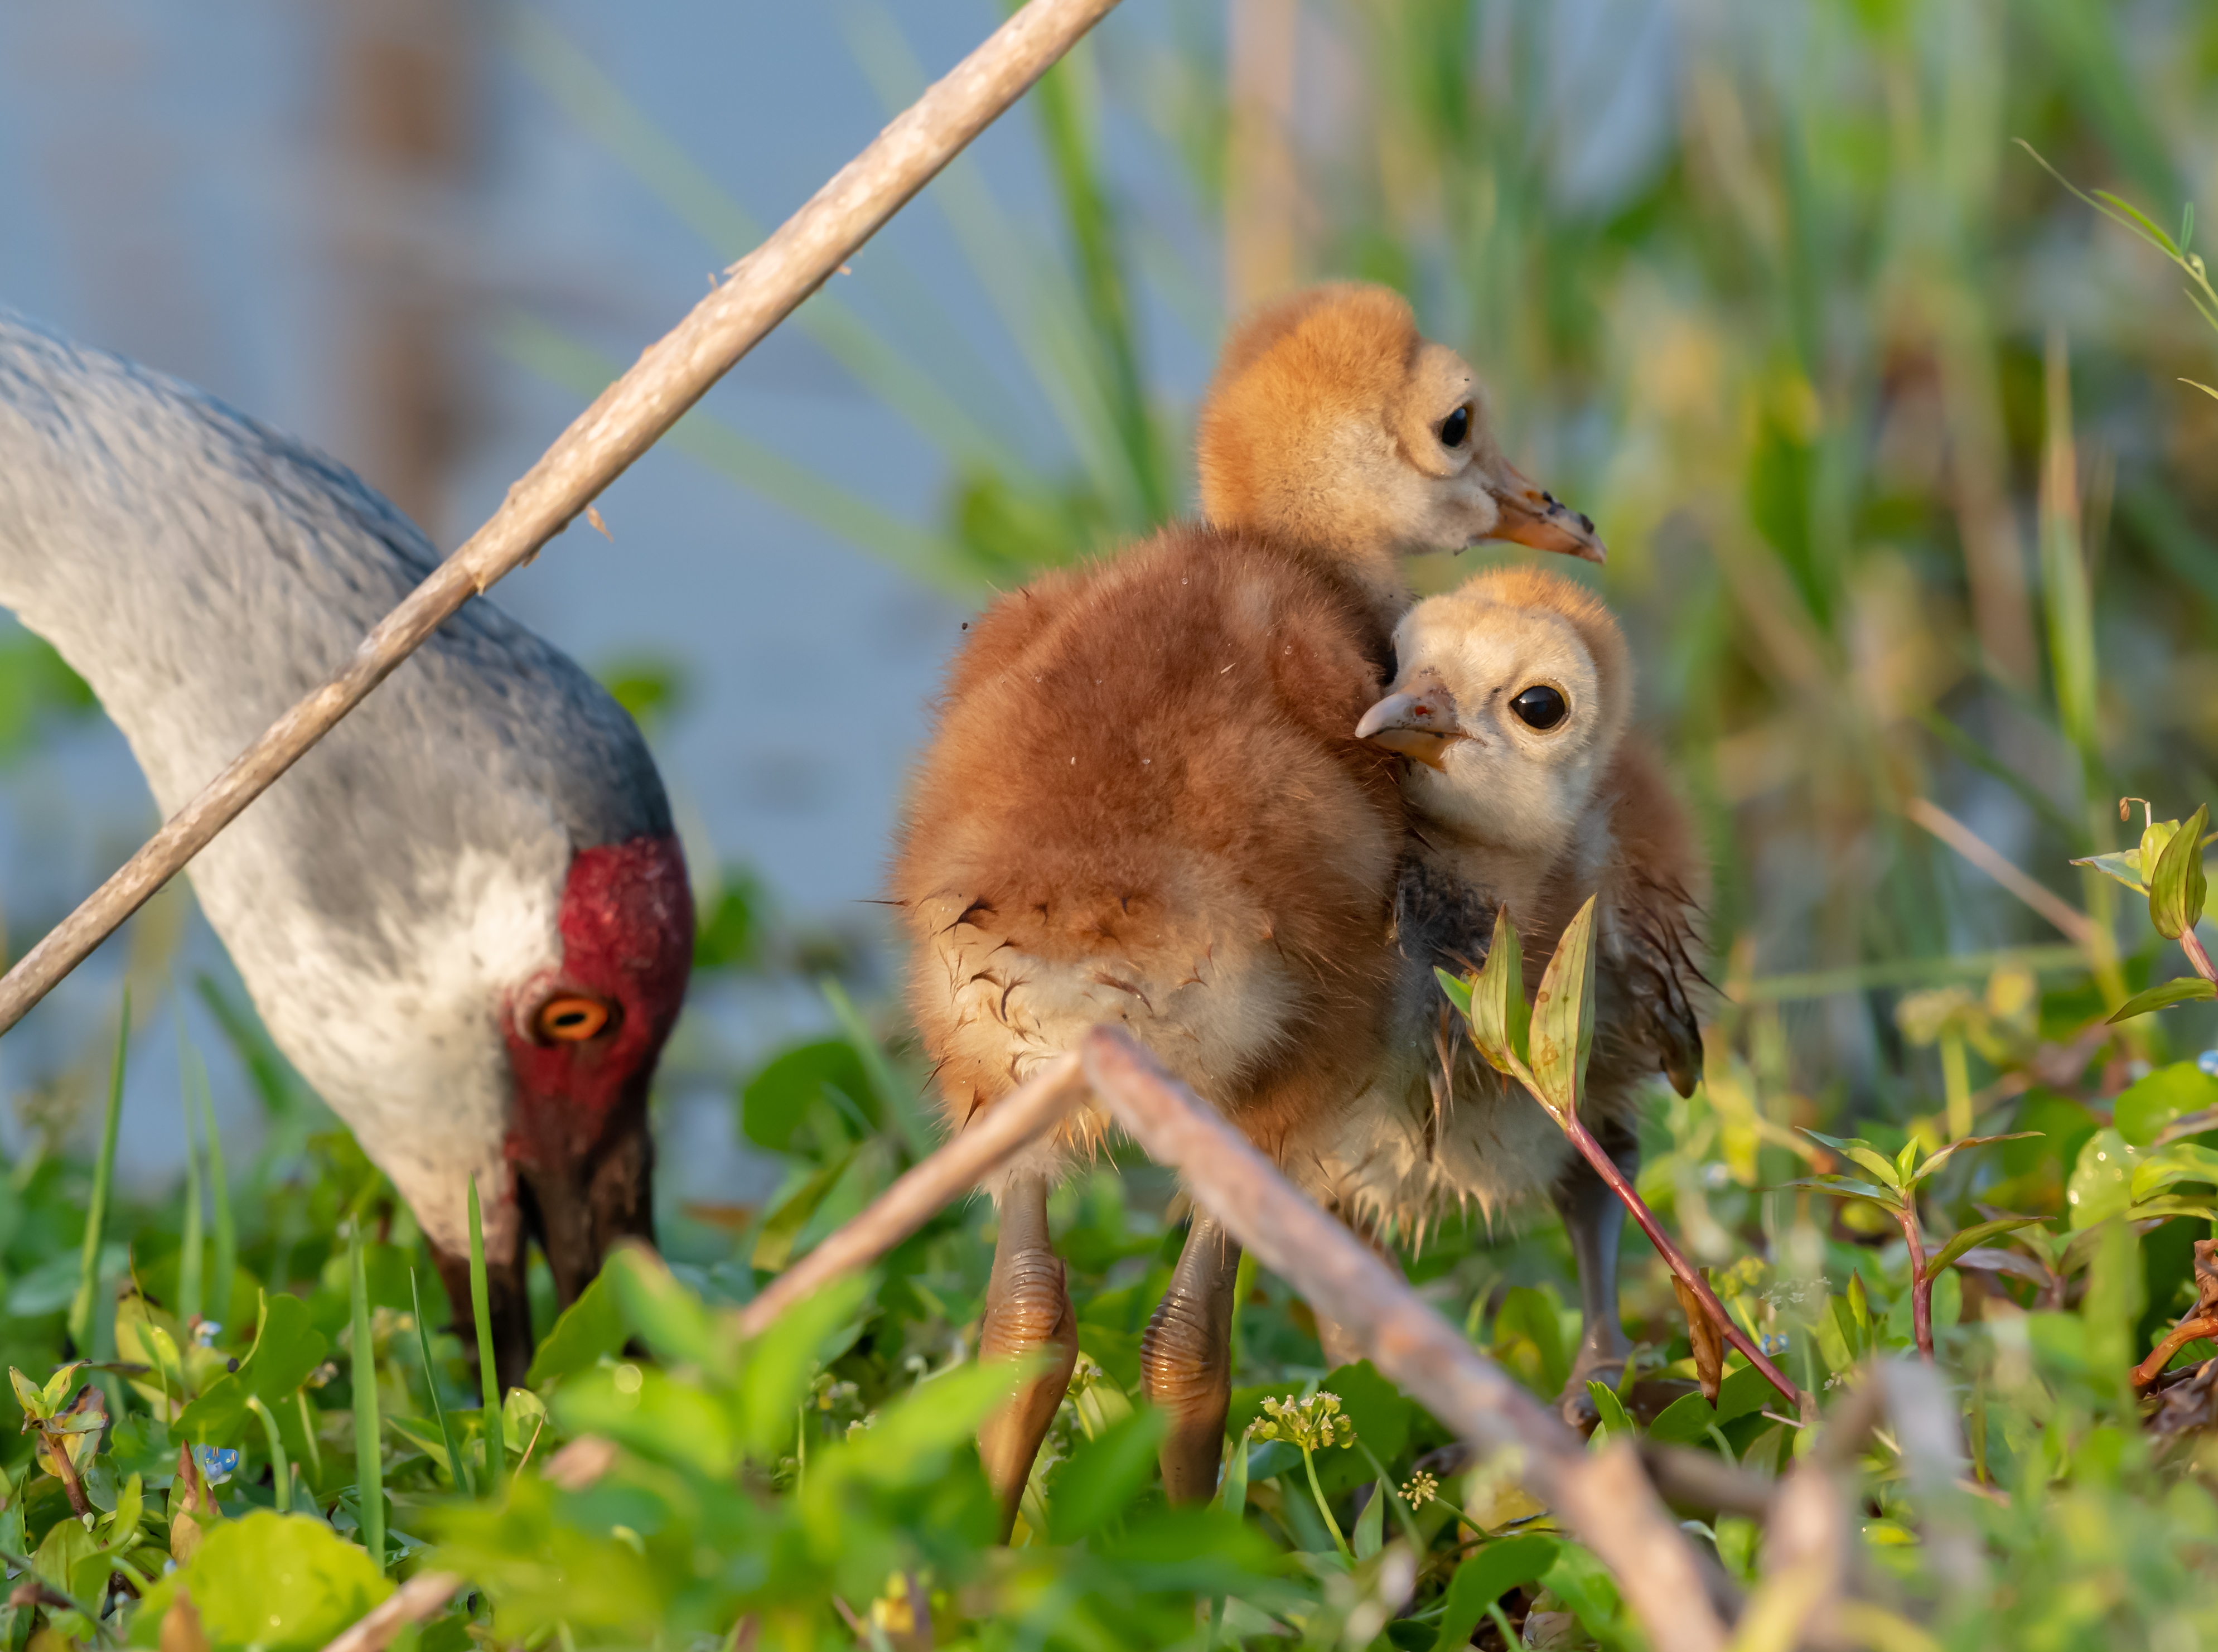 Nikon D850 – D500 – 500MM PF and 500MMF4 and the Sony A9 Capture Beautiful Sandhill Crane Family